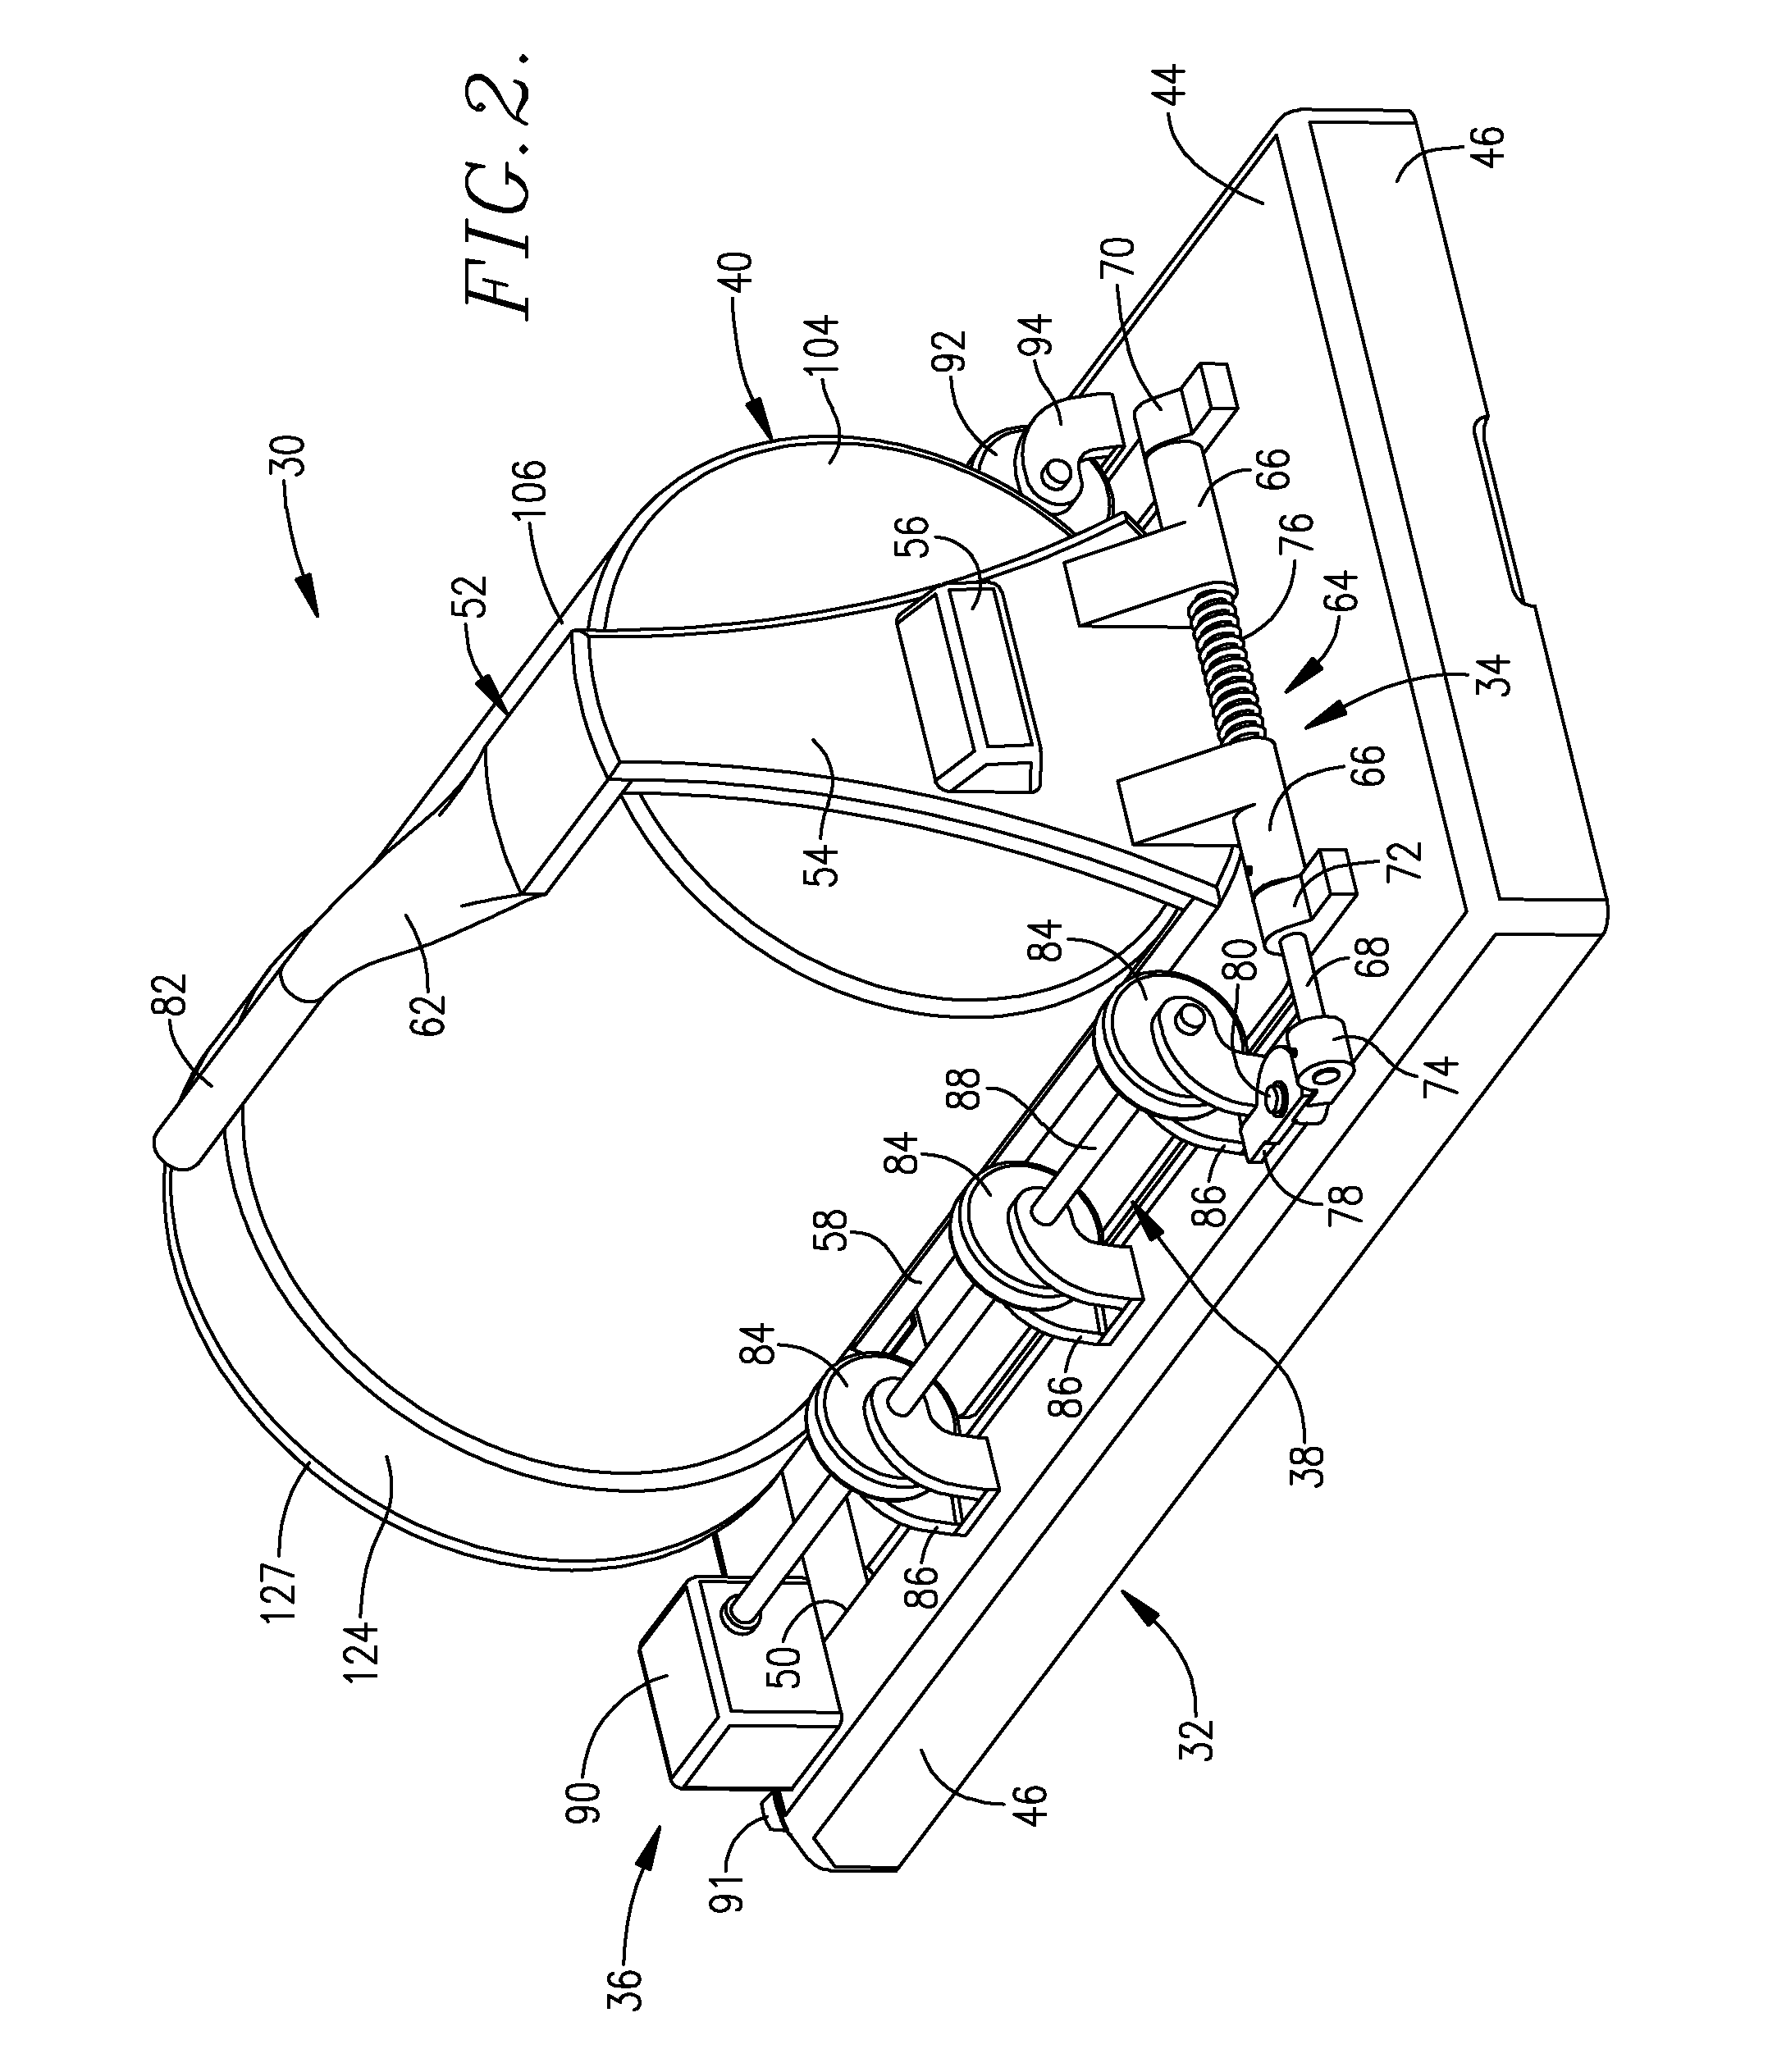 Rotating induction food warming device